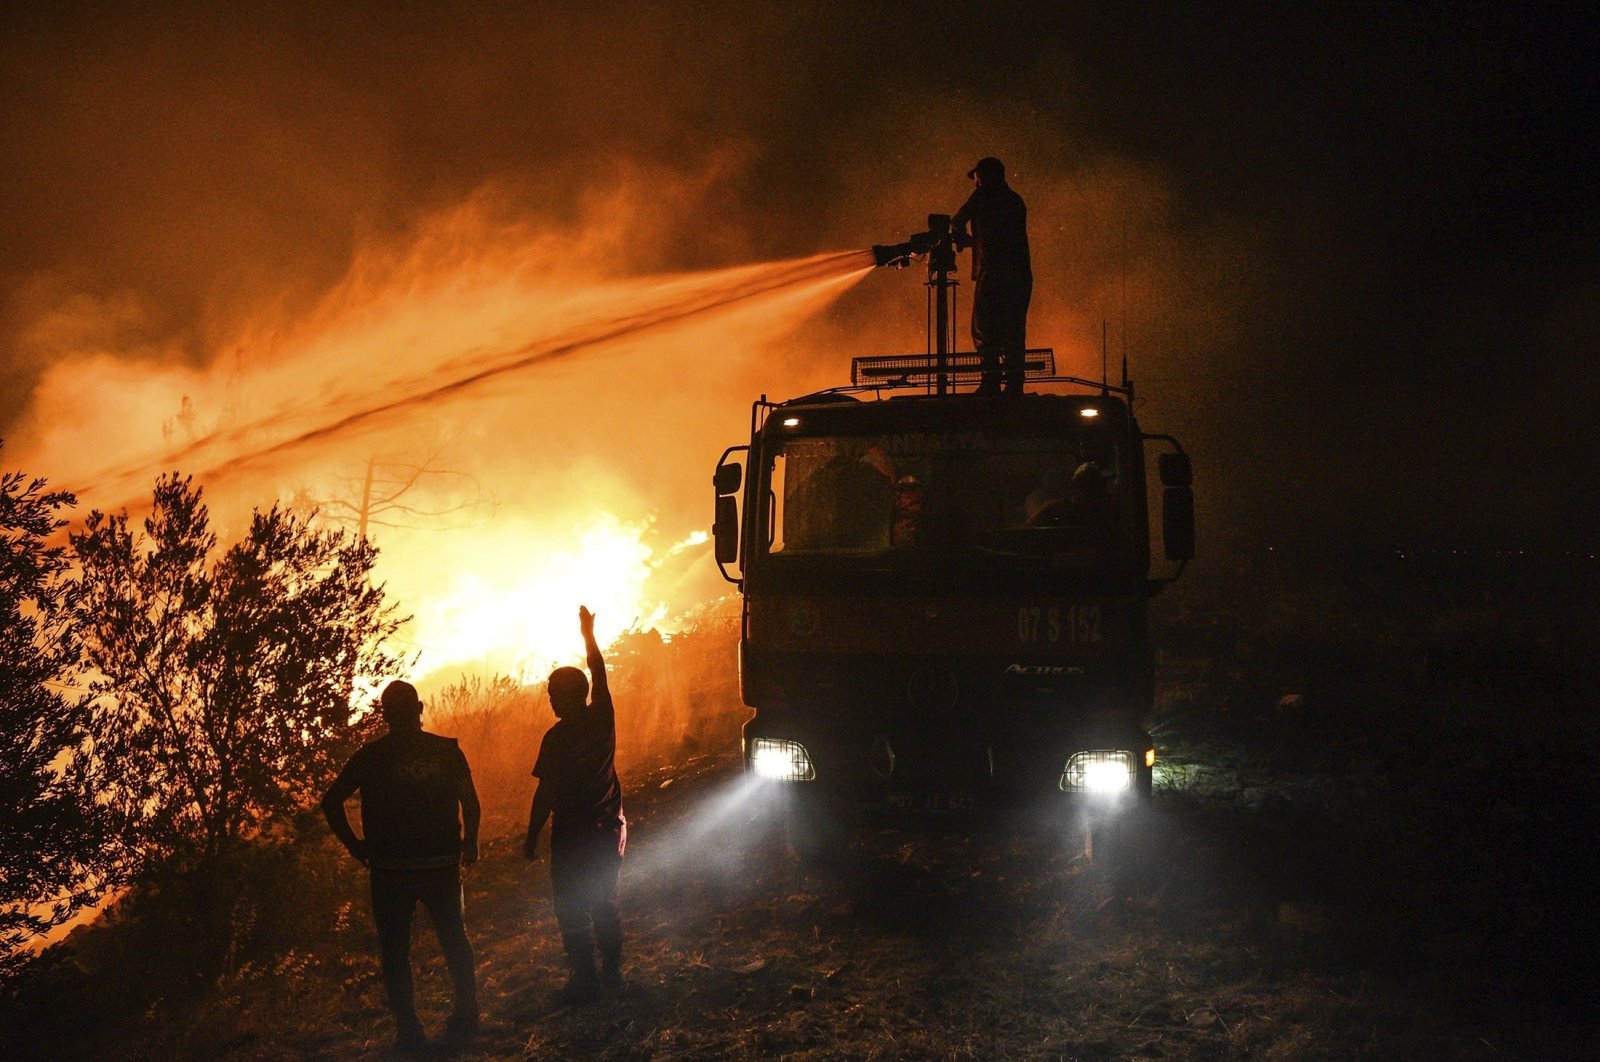 Firefighters pour water as they try to get the fire under control in Kirli village near the town of Manavgat, in Antalya province, Turkey, July 30, 2021. (AP Photo)